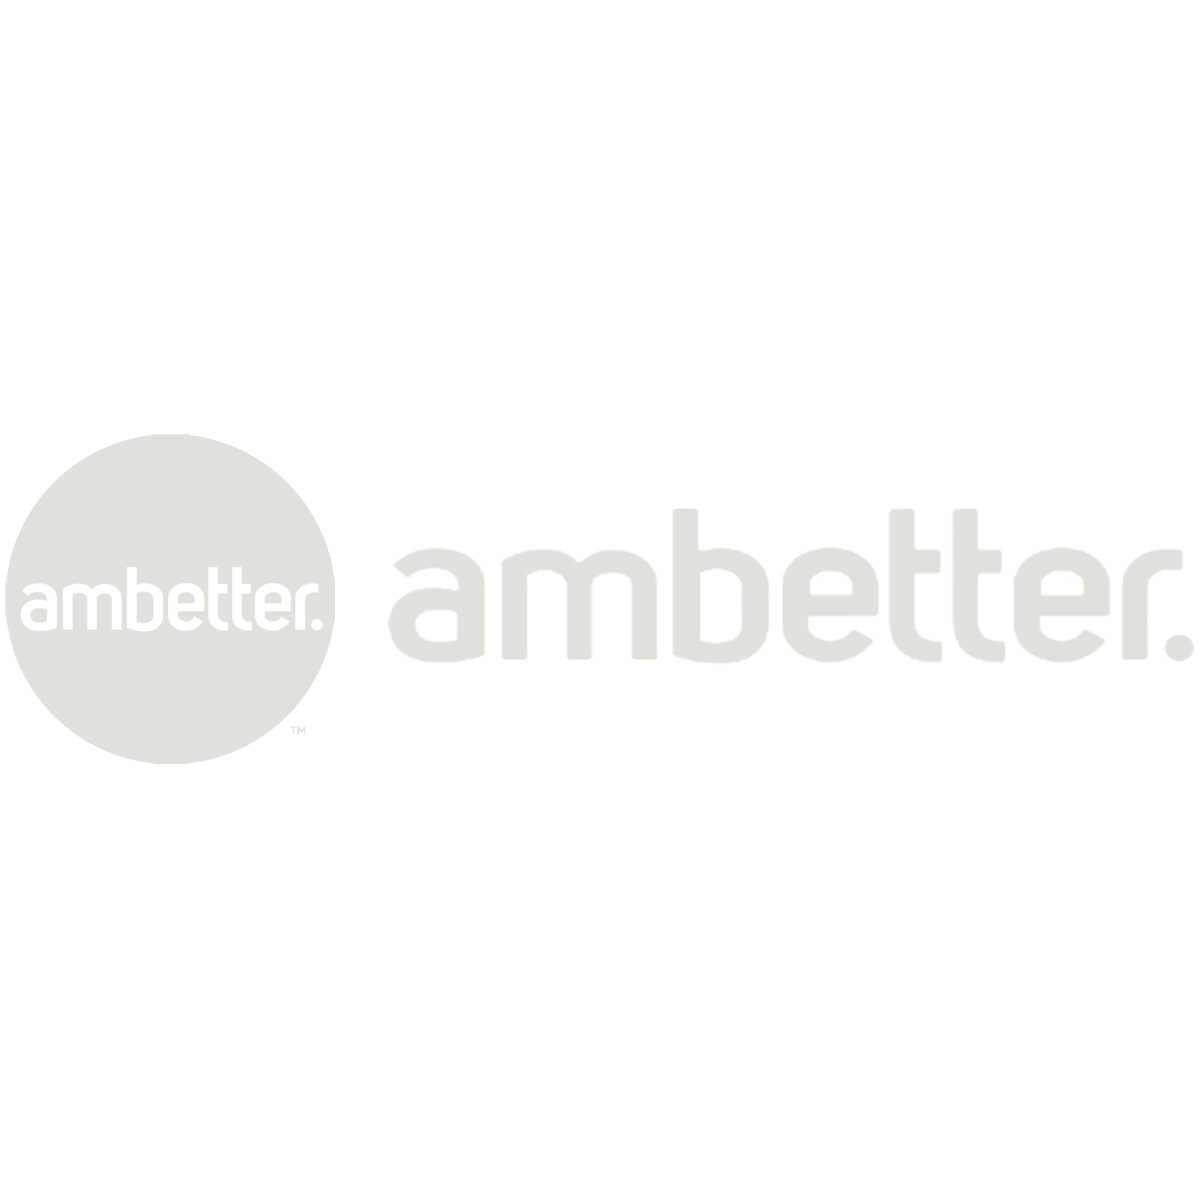 ambetter.png